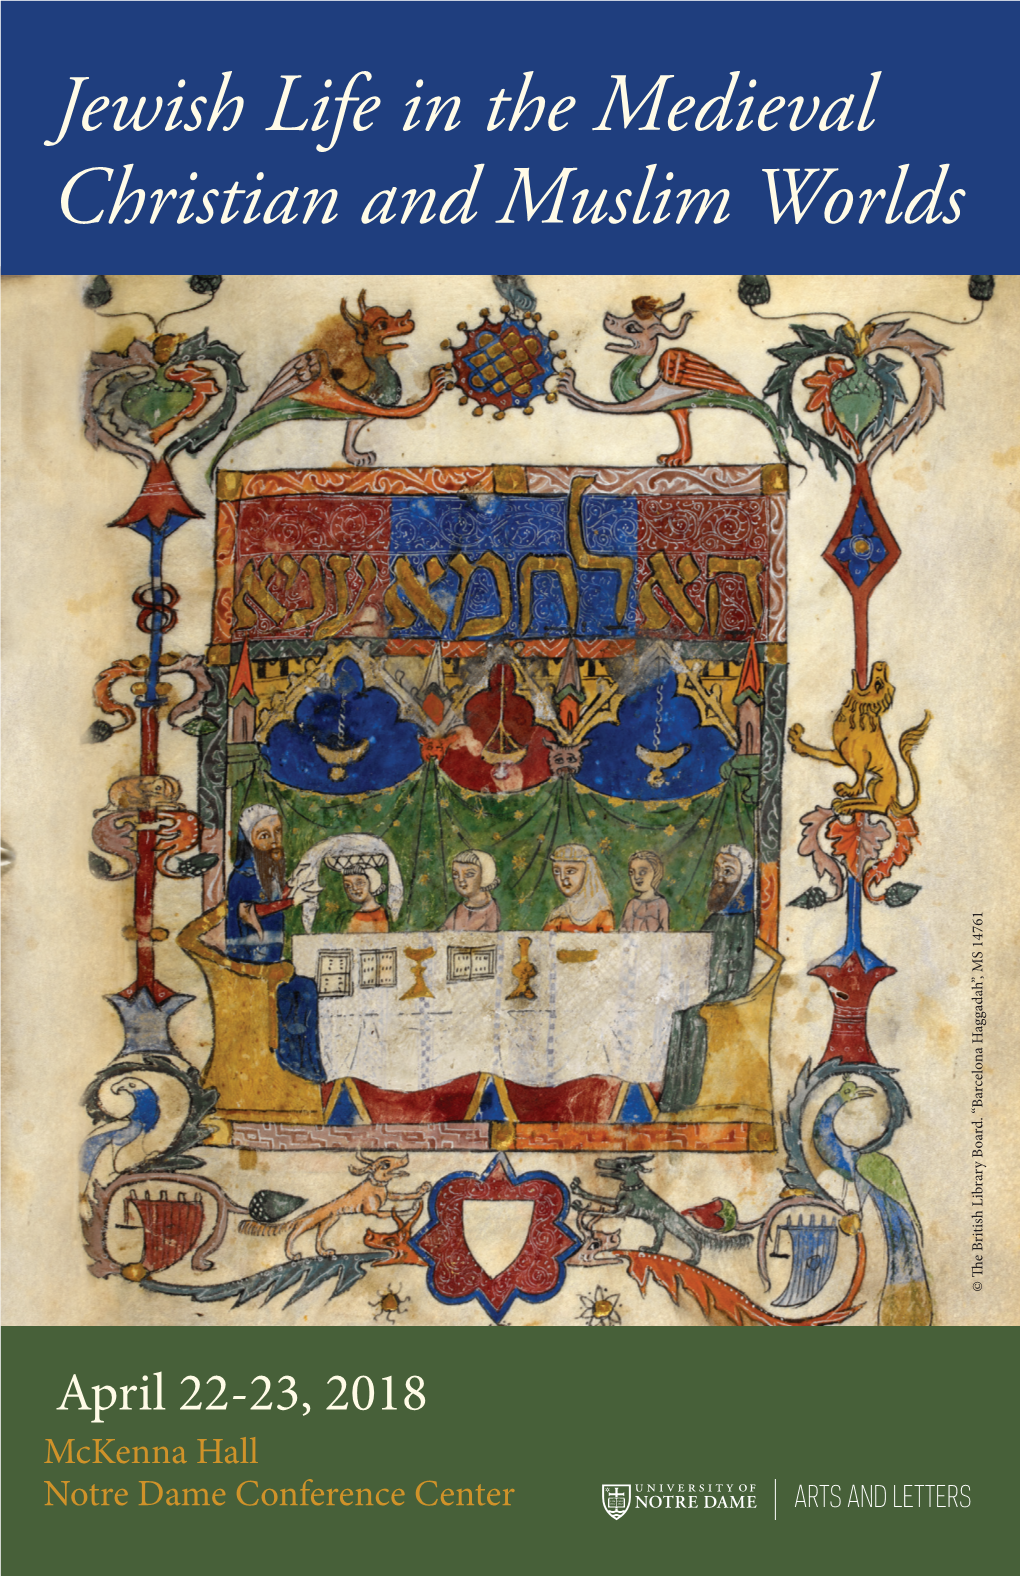 Jewish Life in the Medieval Christian and Muslim Worlds